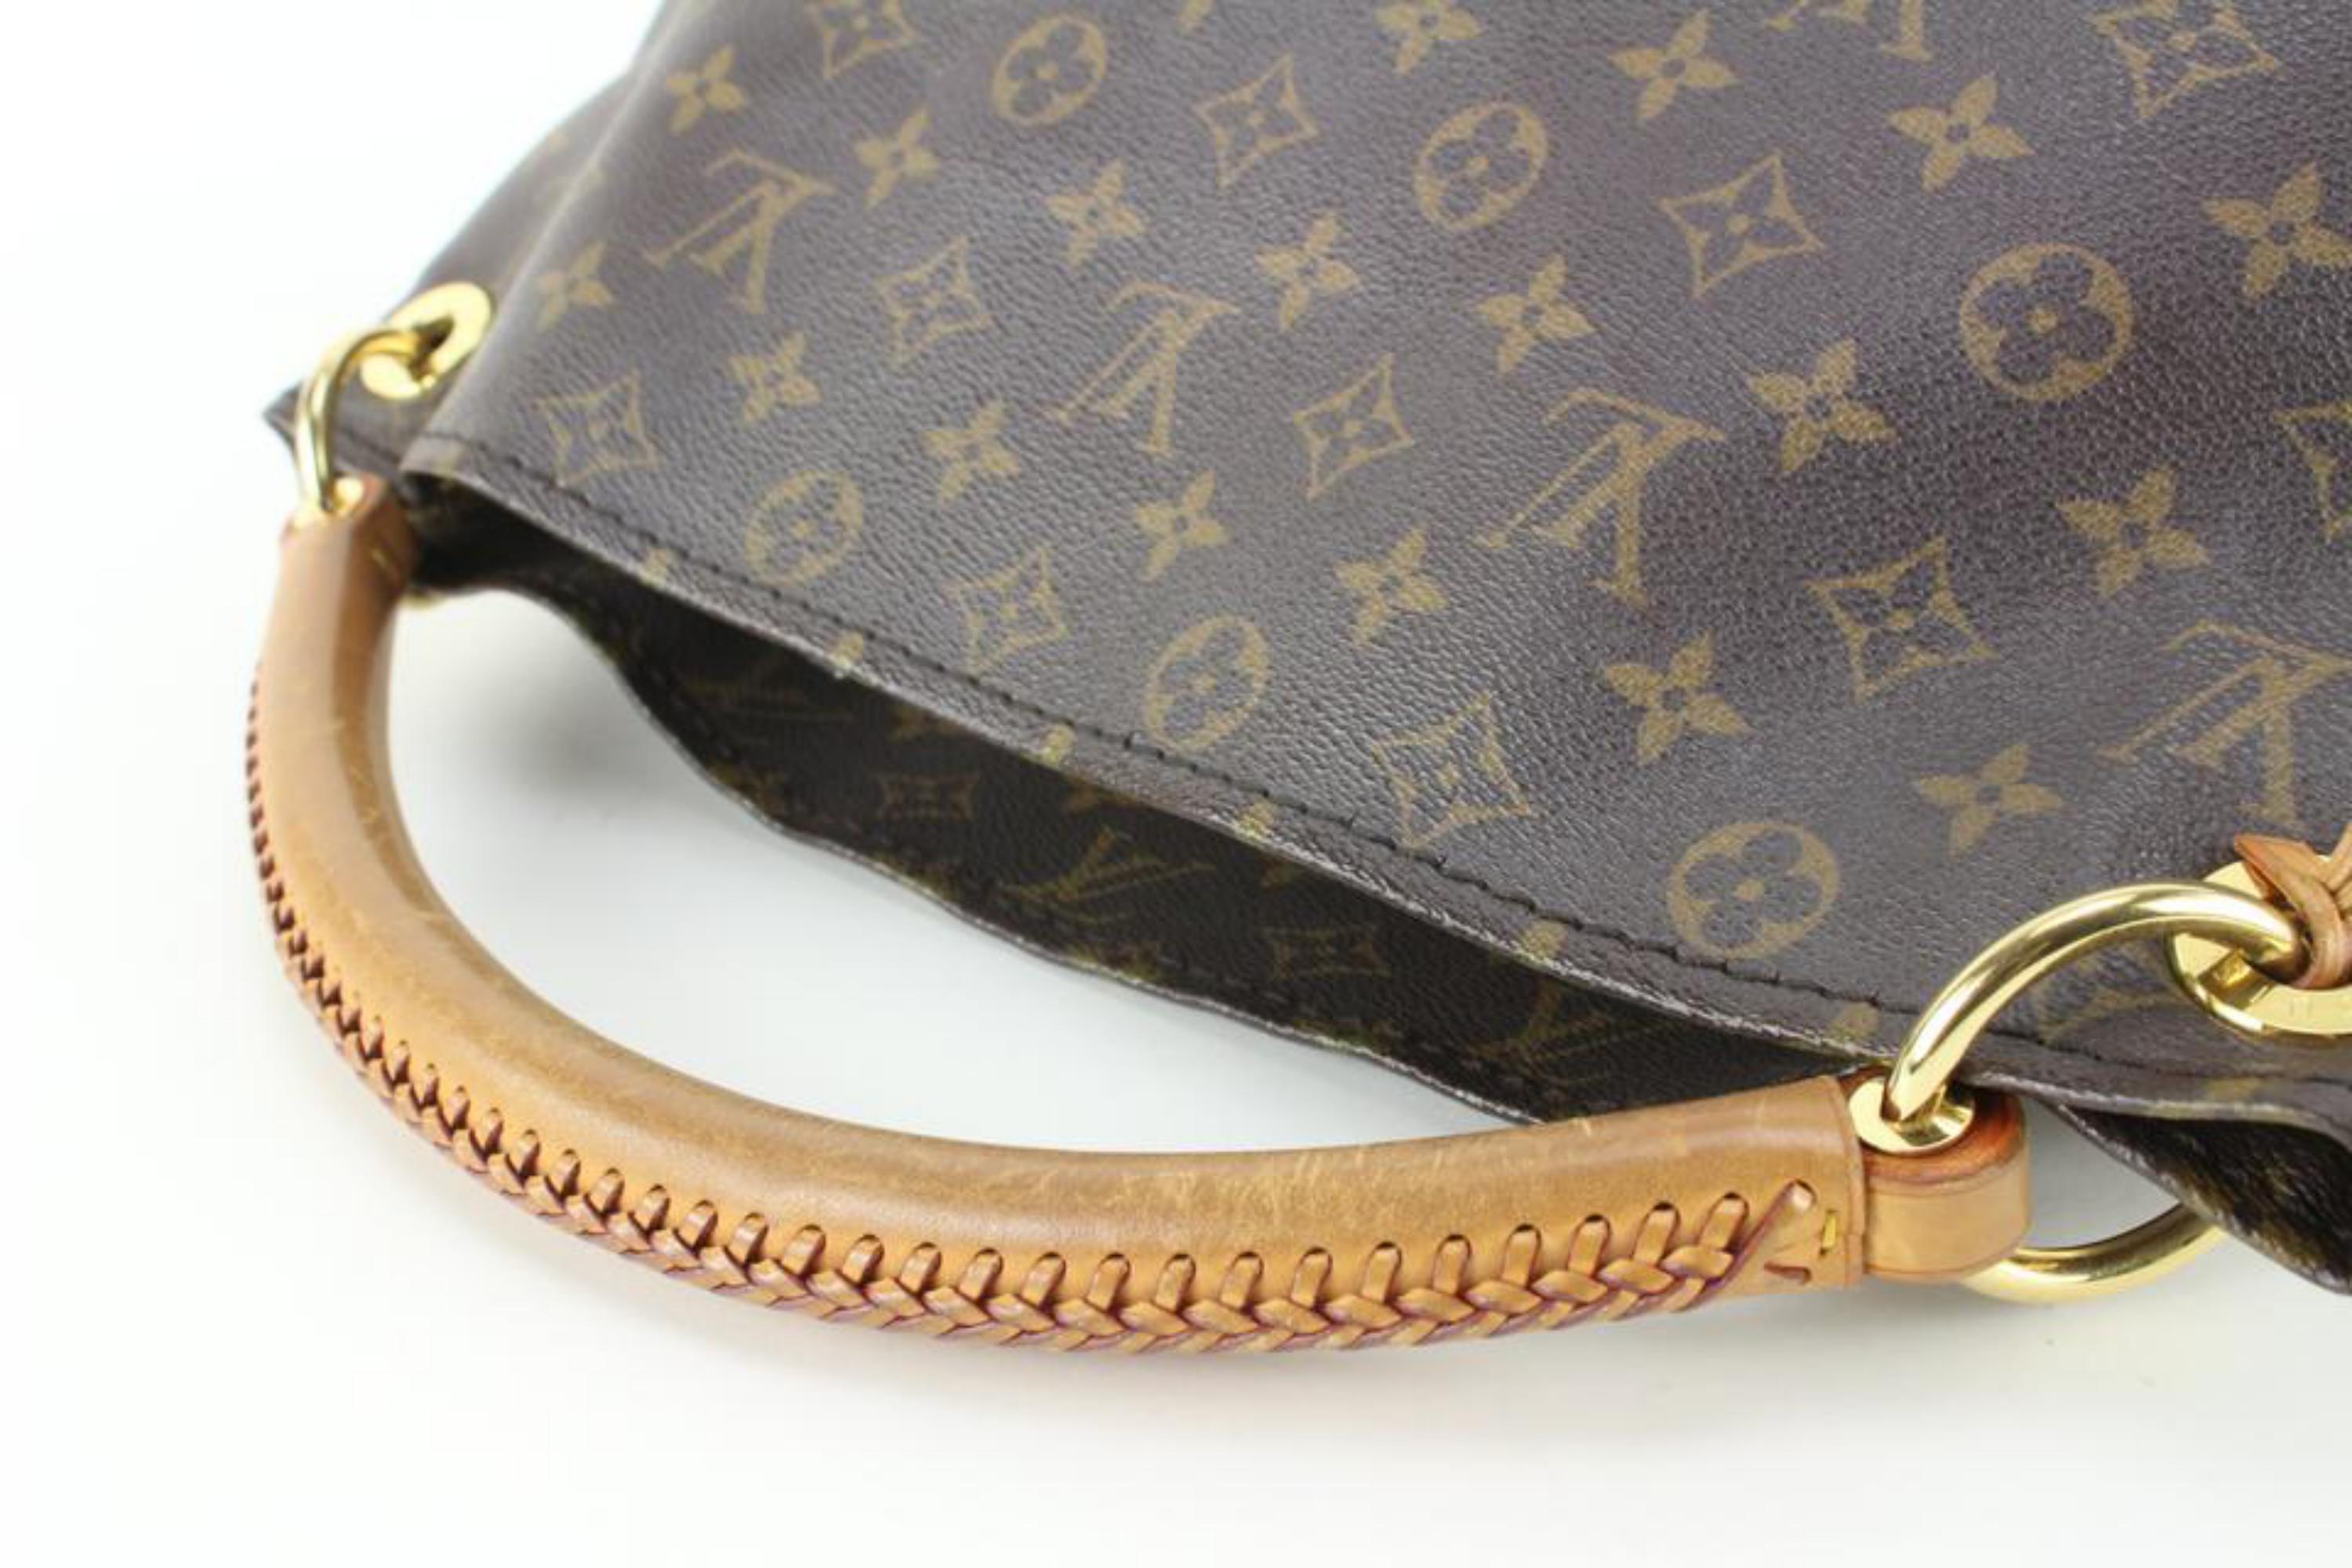 Louis Vuitton Monogram Artsy MM Hobo Bag  10lk830s In Good Condition For Sale In Dix hills, NY